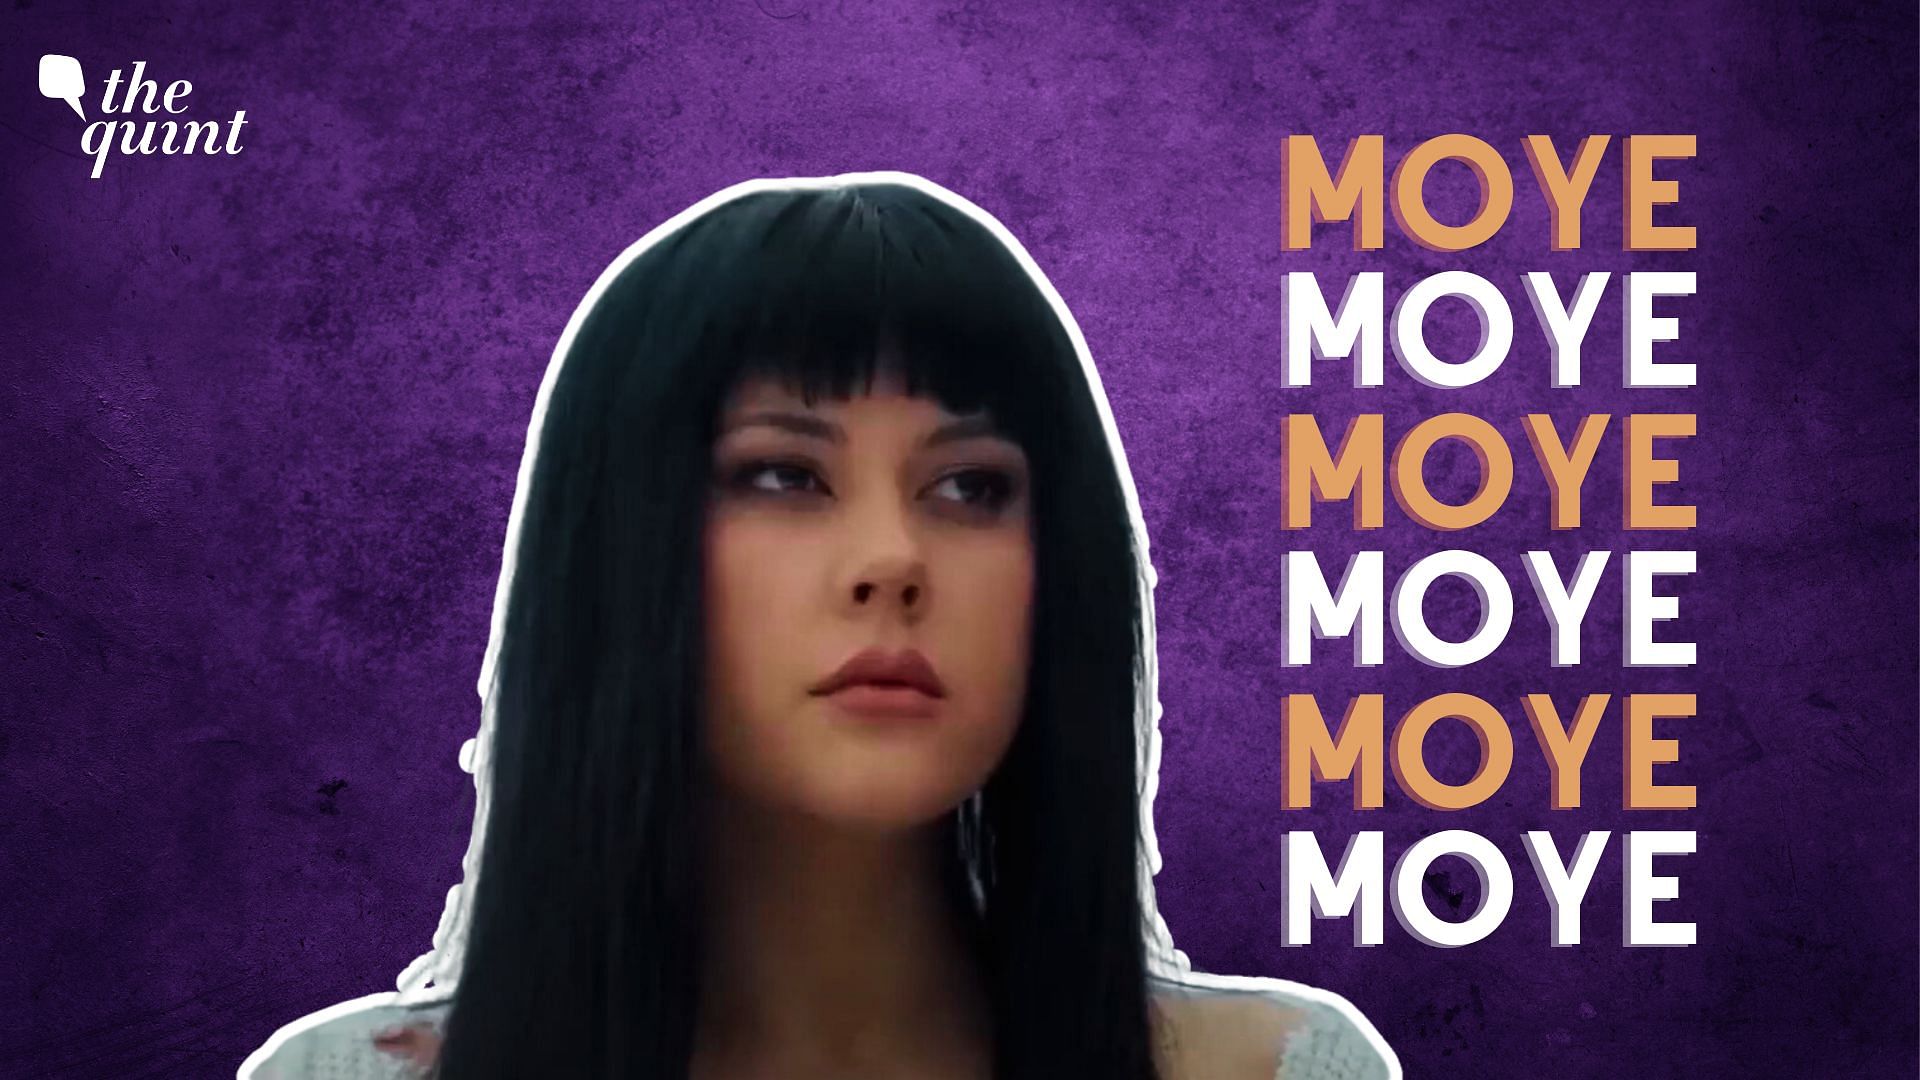 What Is ‘Moye Moye’, the Trend That Has Taken the Internet by Storm?